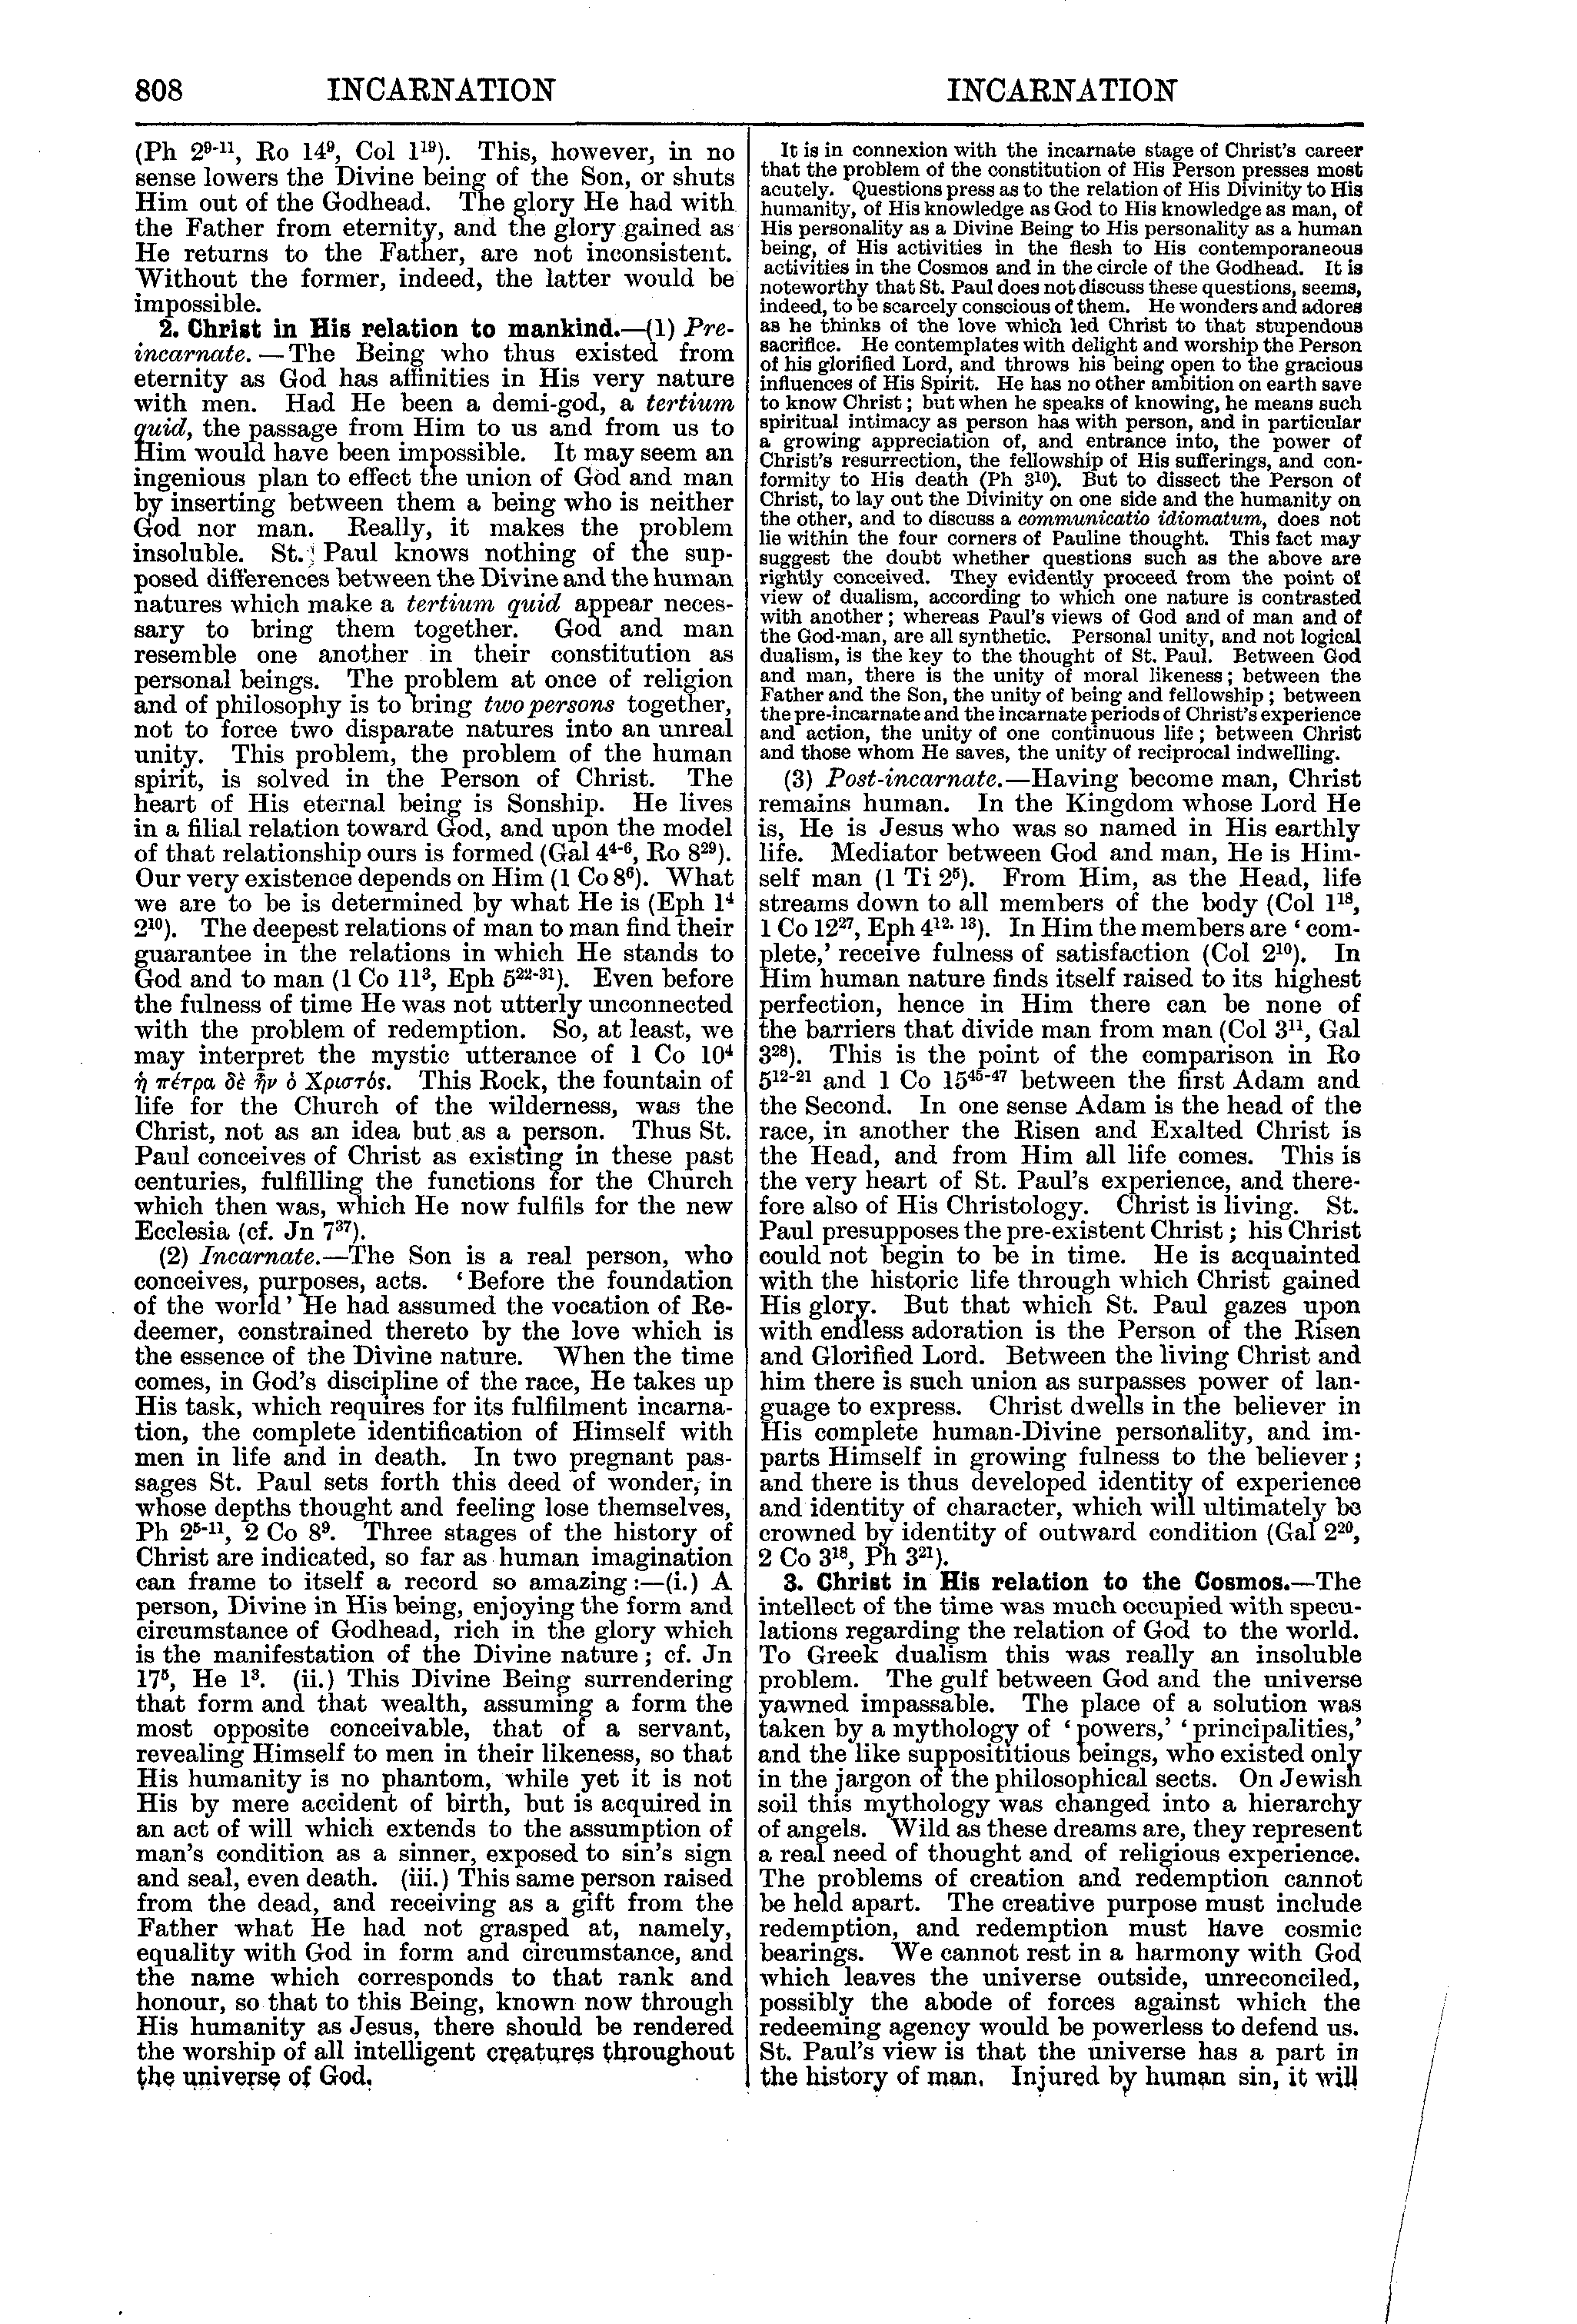 Image of page 808